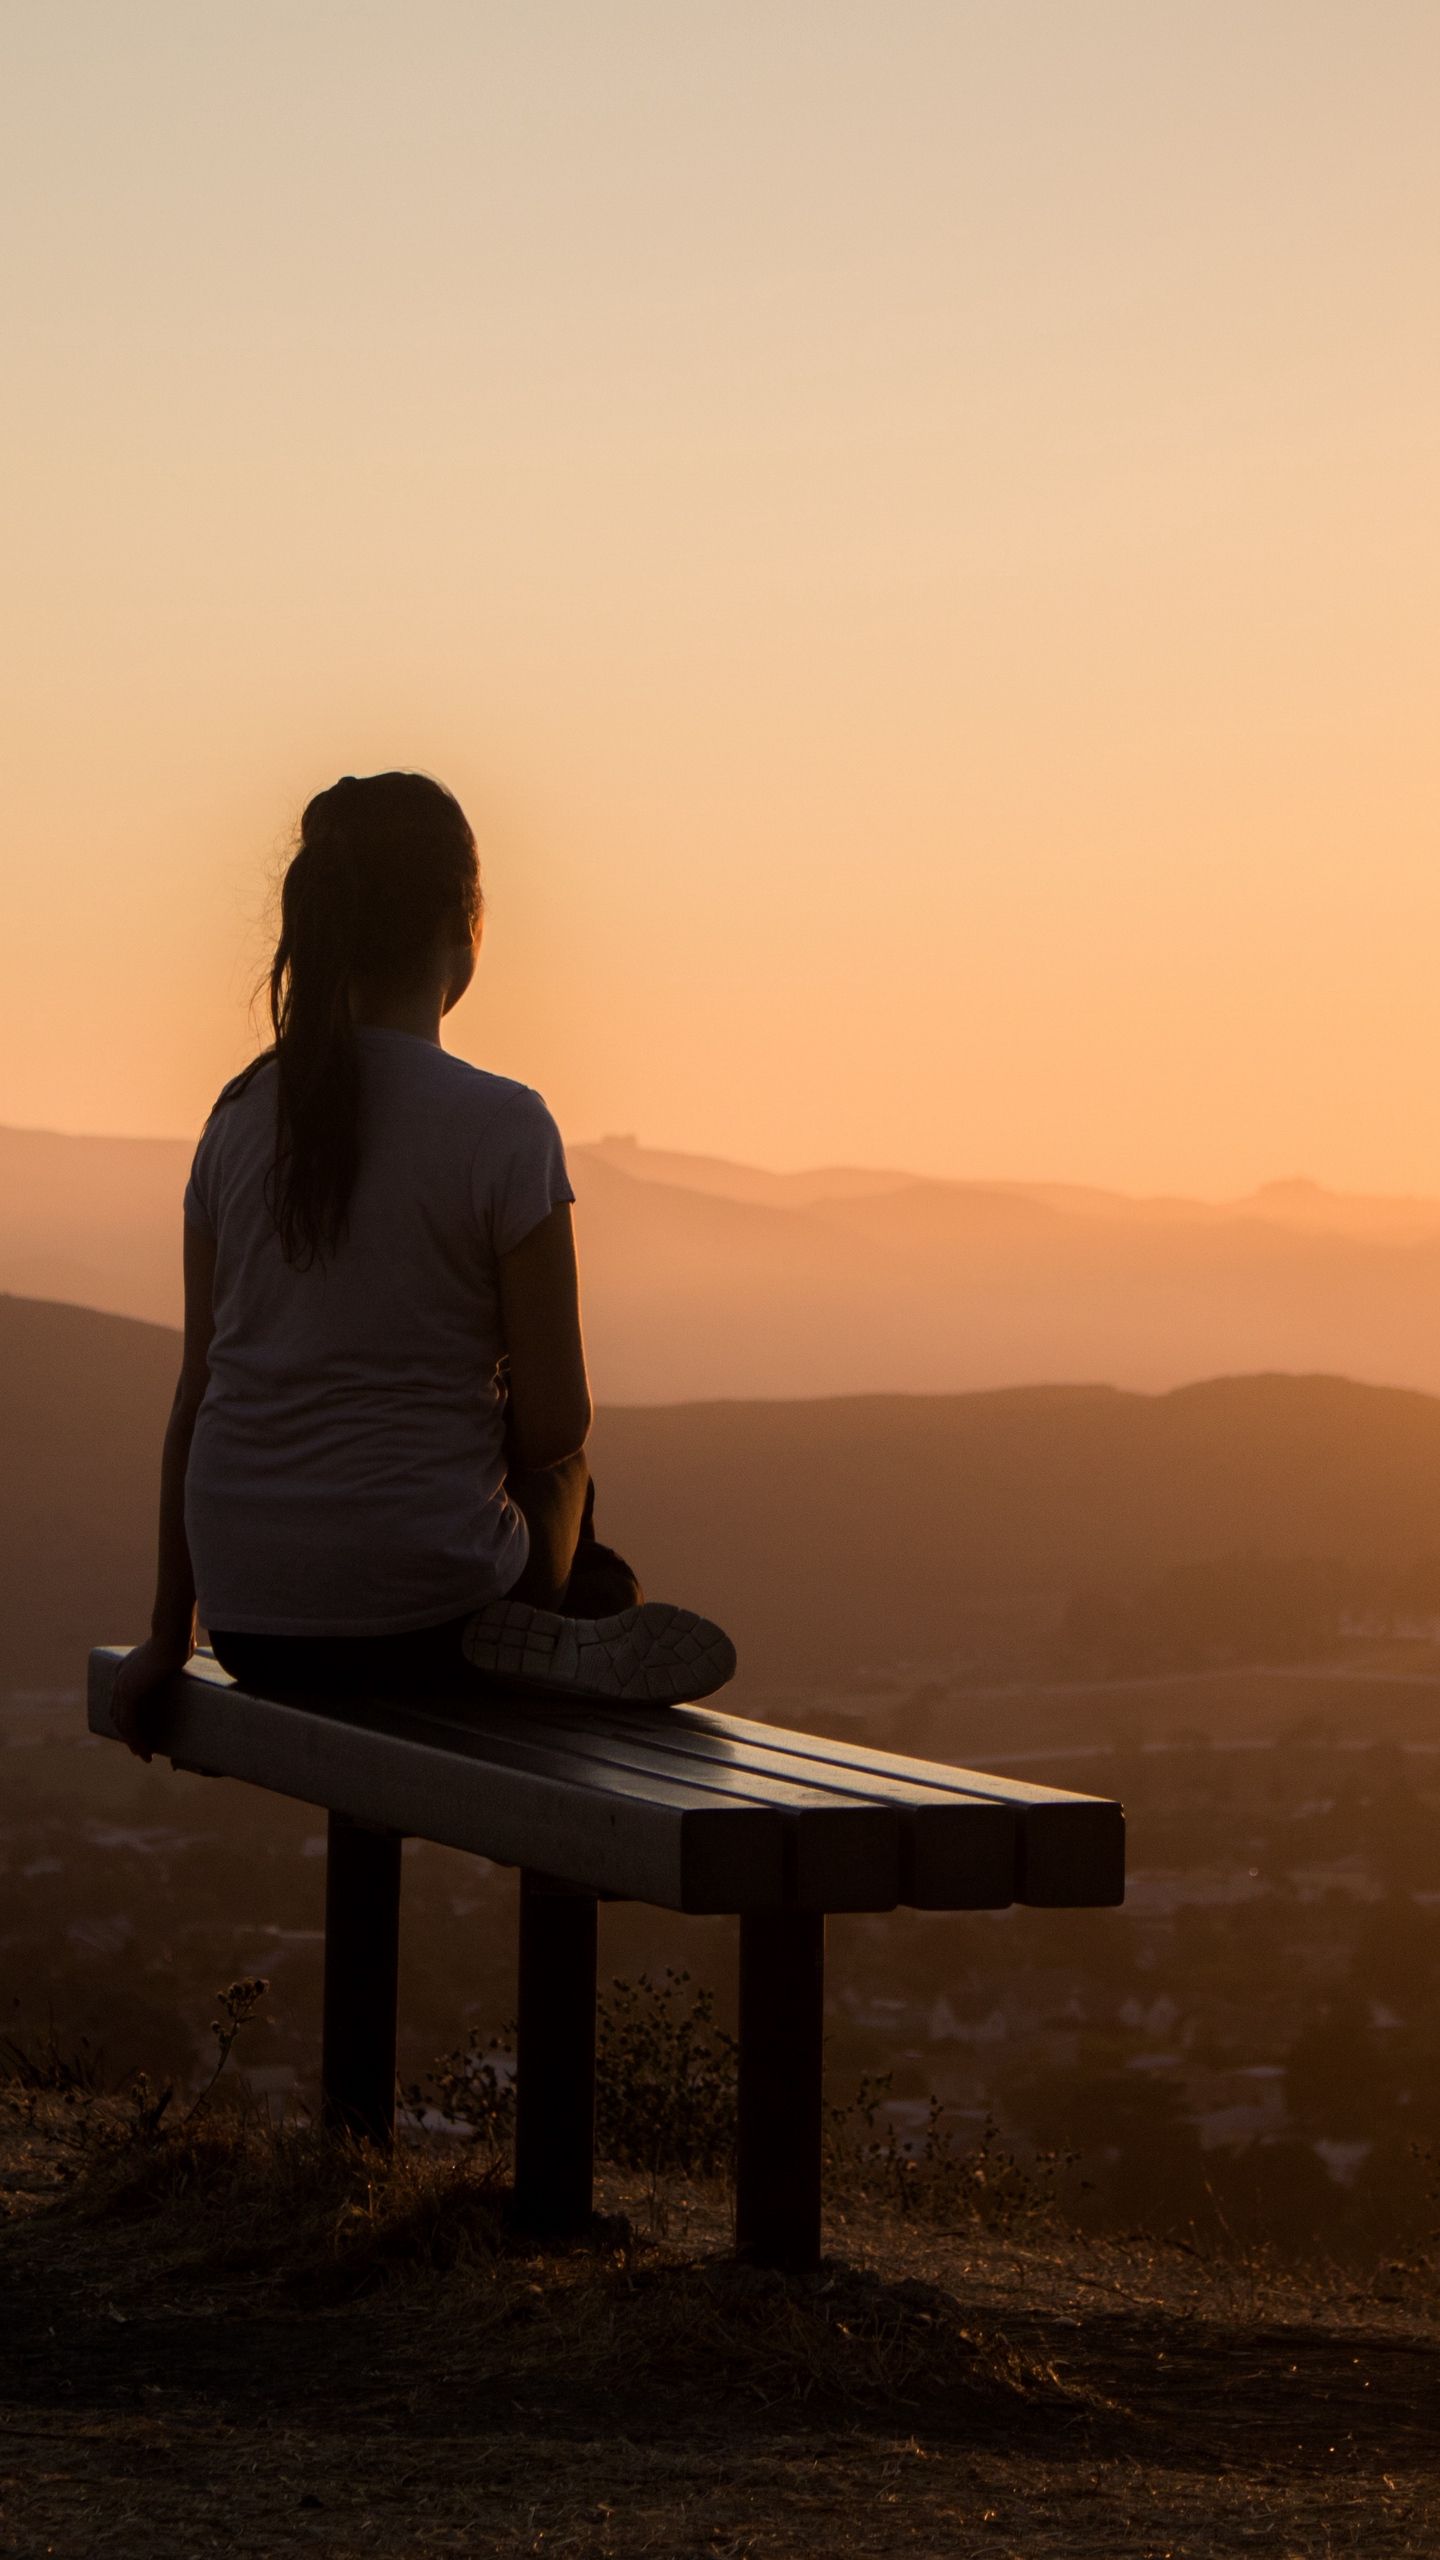 Download wallpaper 1440x2560 bench, alone, solitude, sunset